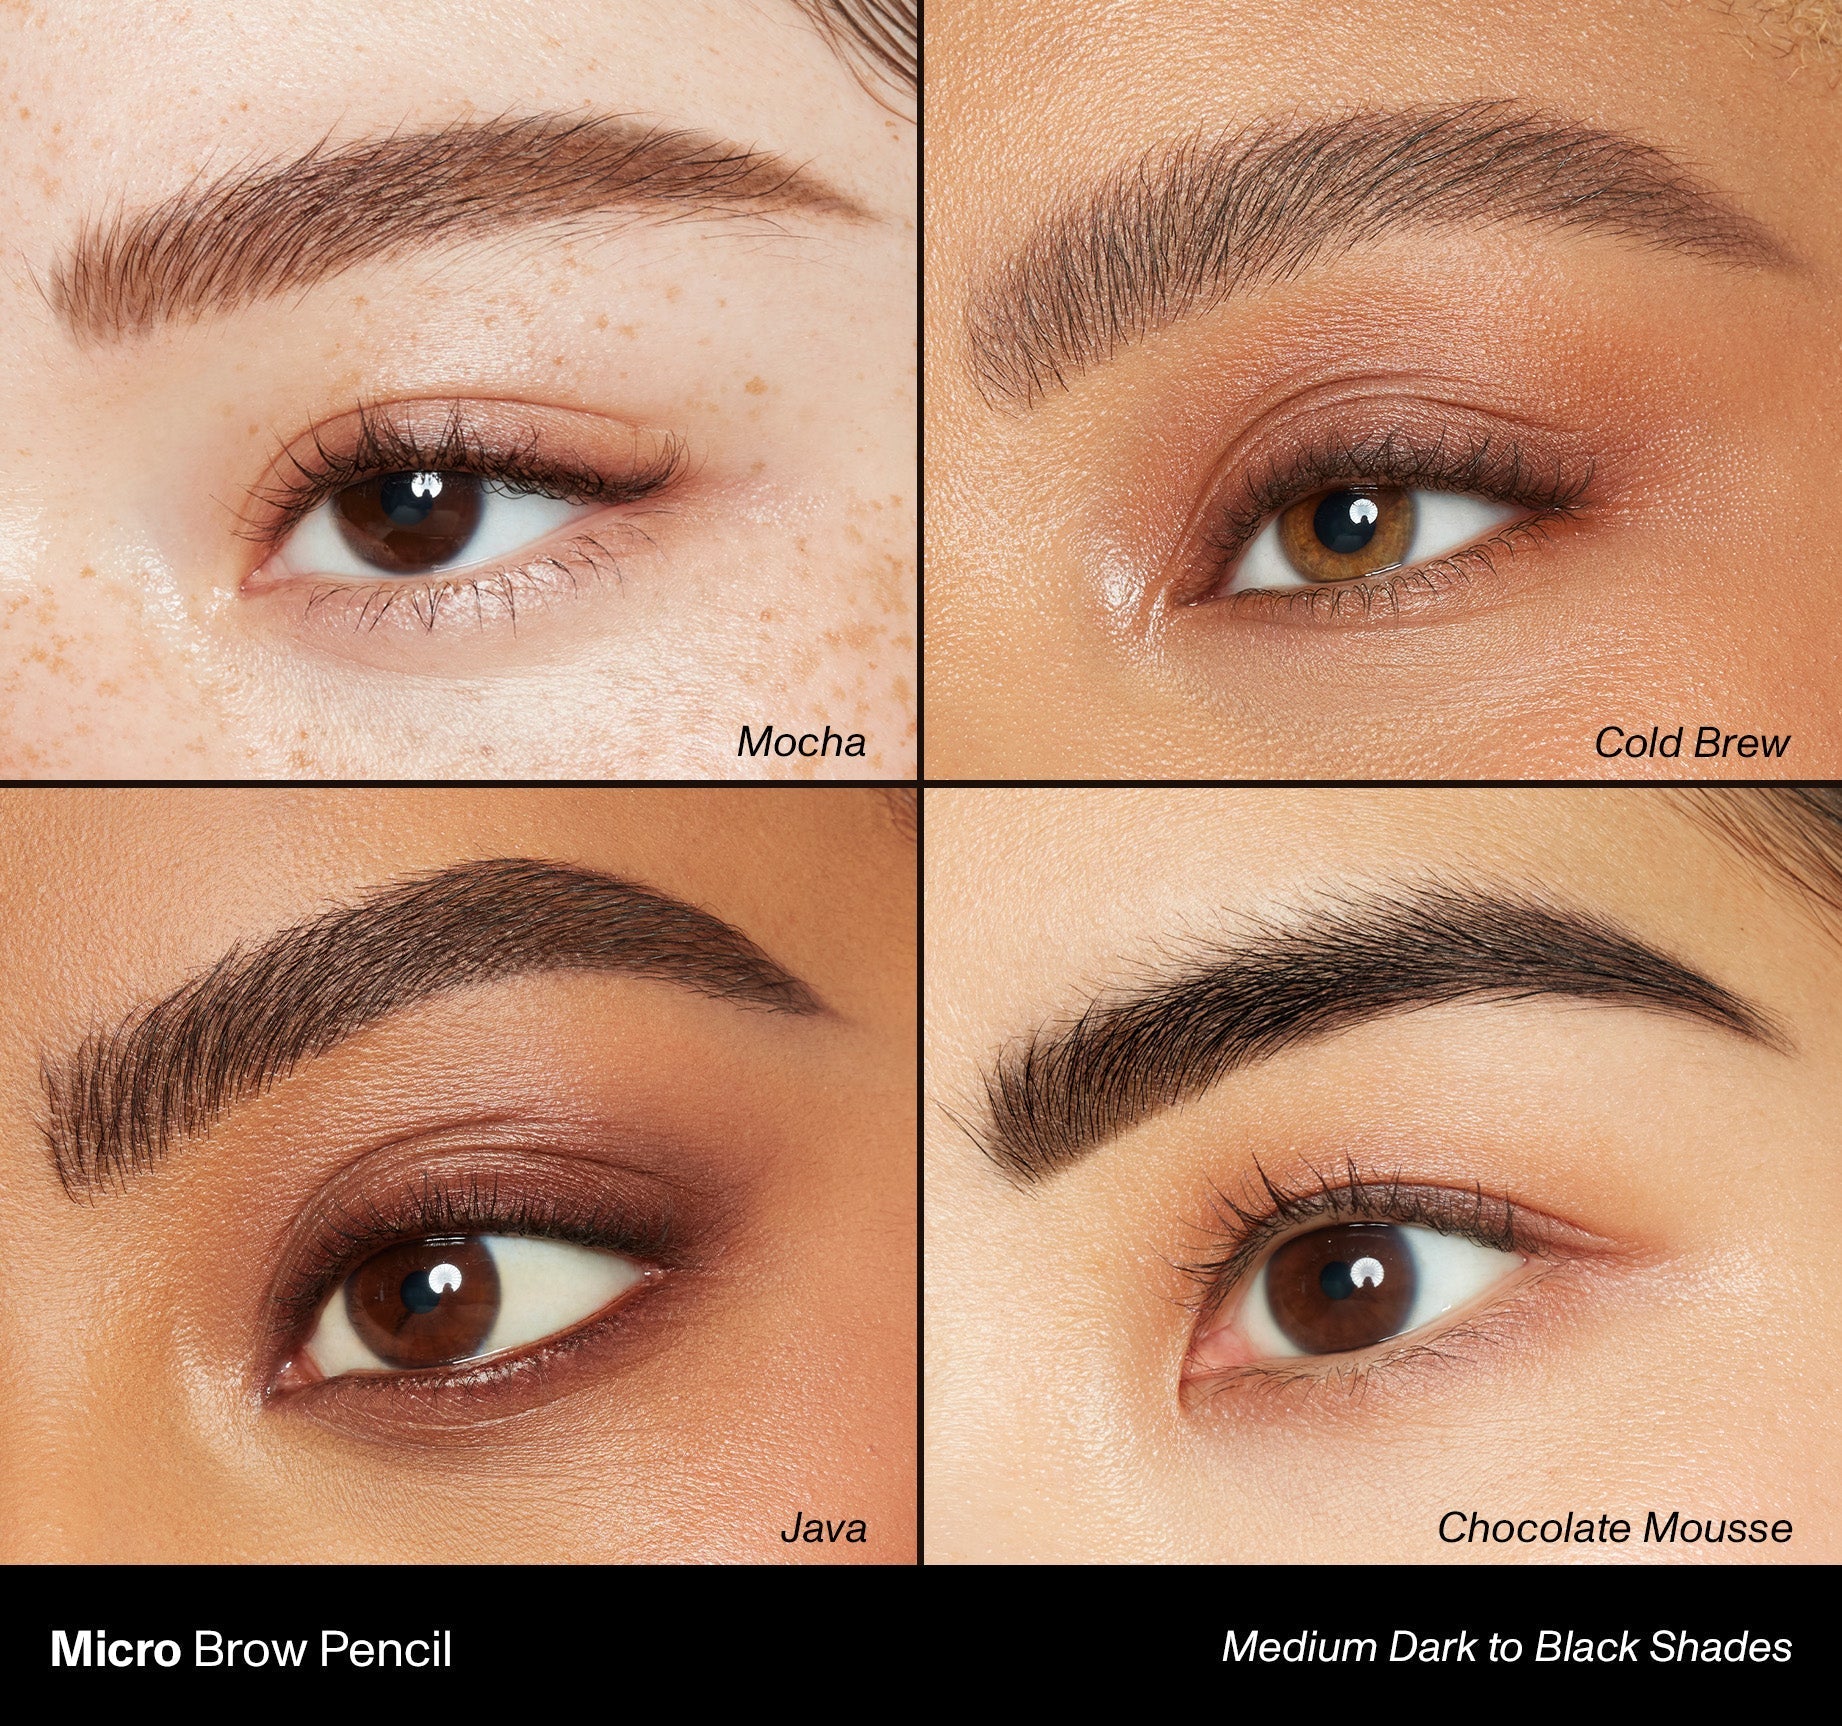 Cold & Dual-Ended | Brew Morphe, Micro Brow Spoolie Pencil